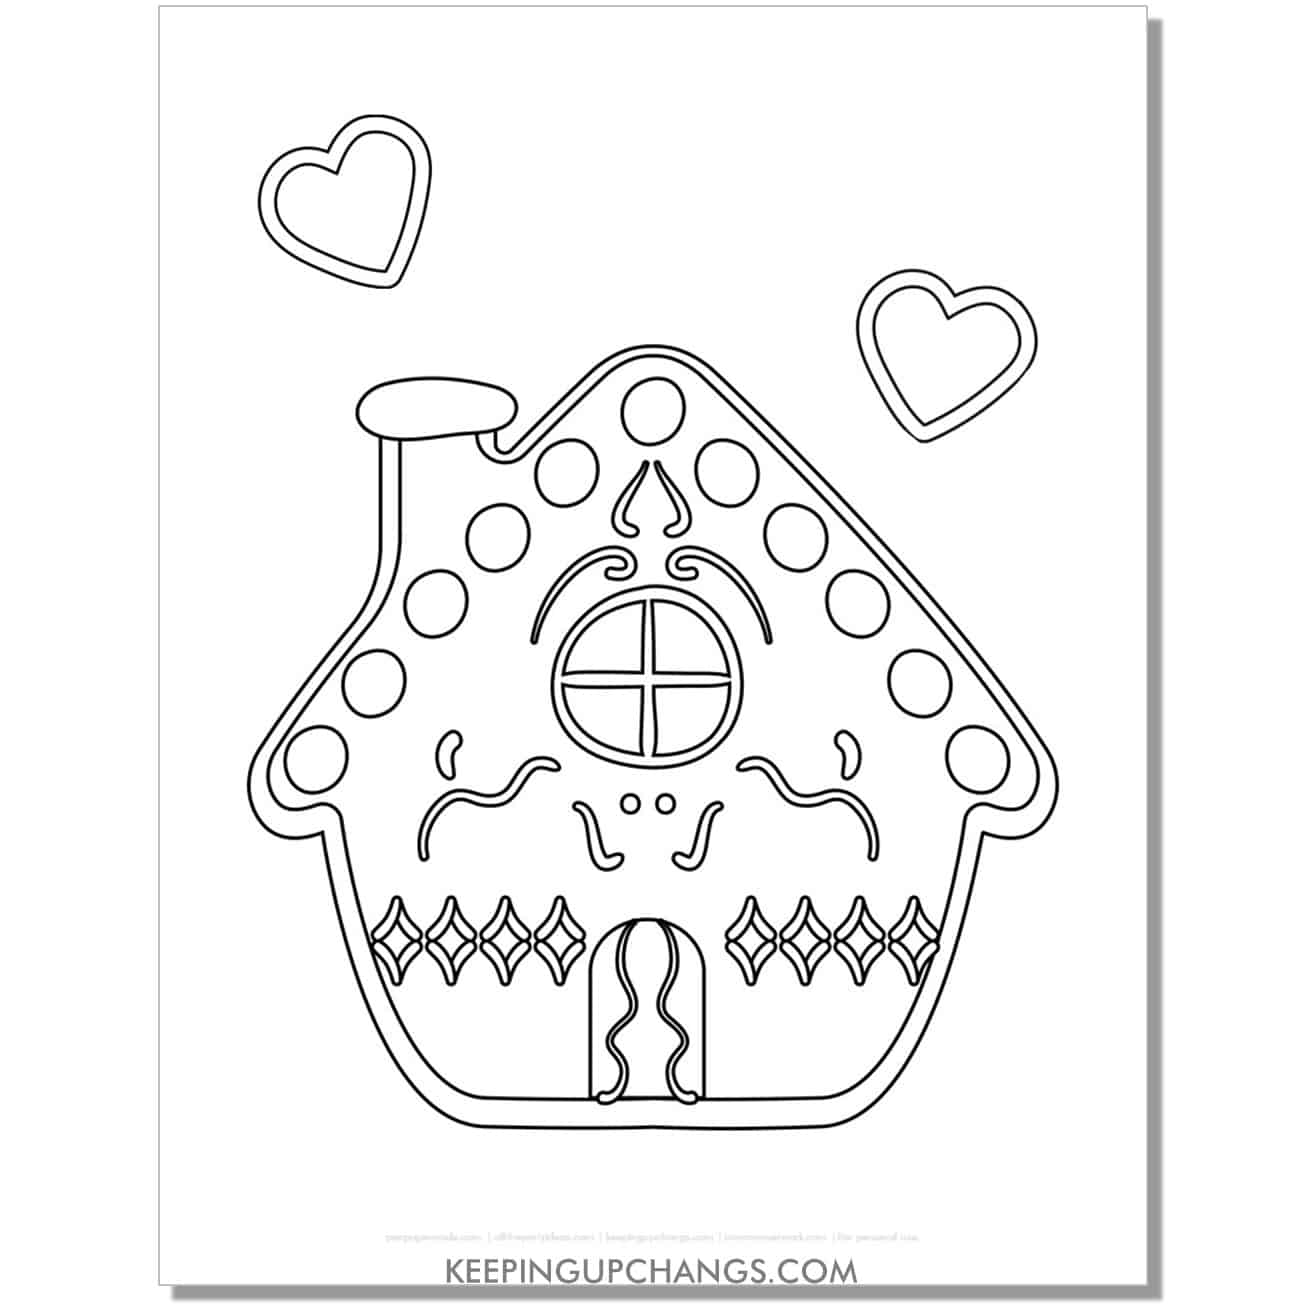 free easy, simple gingerbread house coloring page.